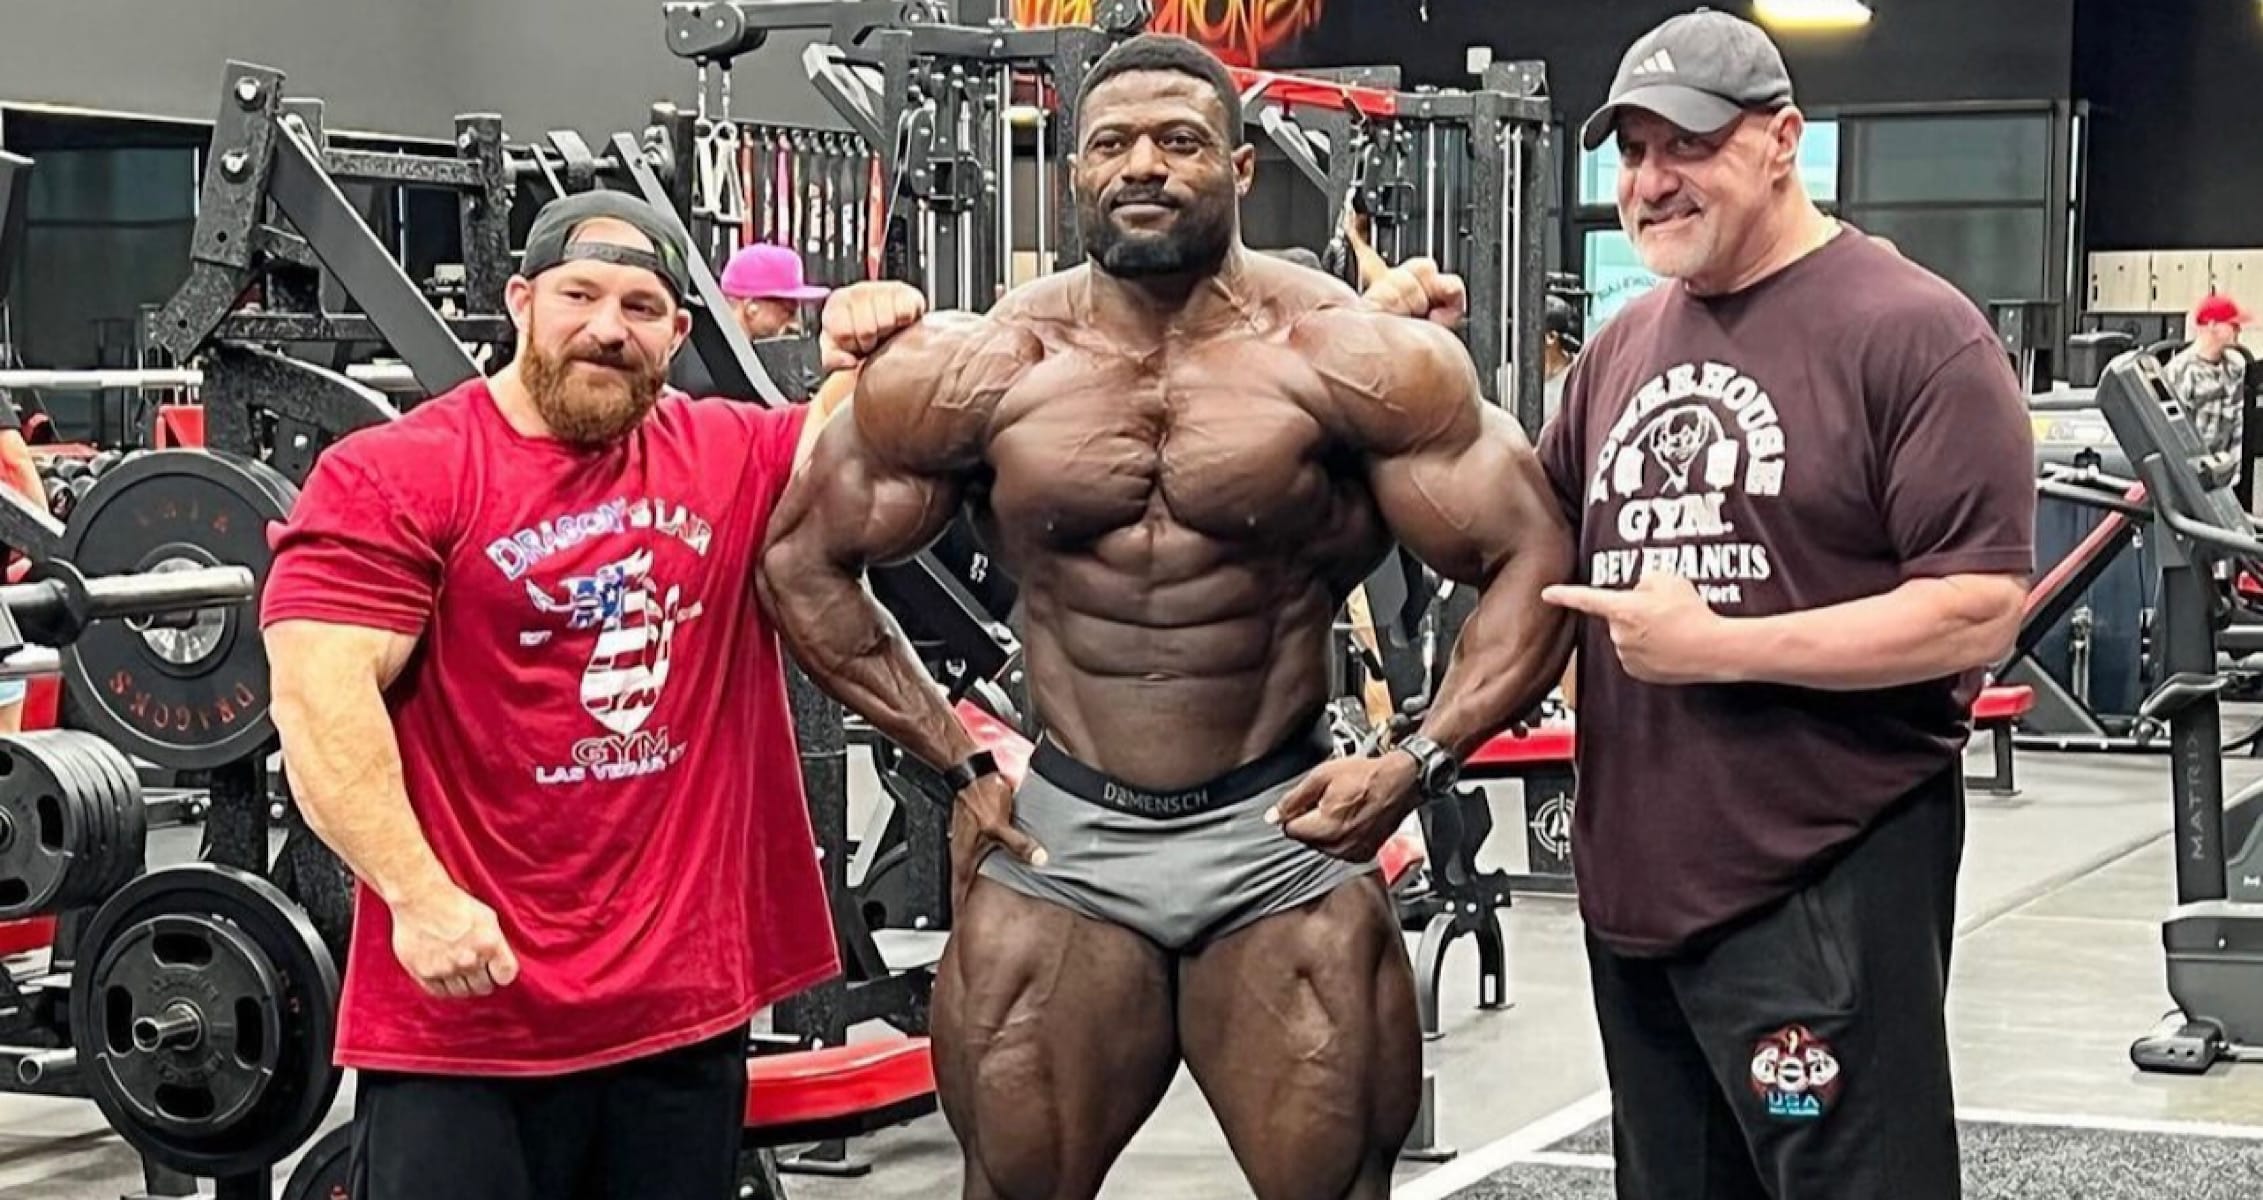 Andrew Jacked Looks Impressive Days Out From Texas Pro